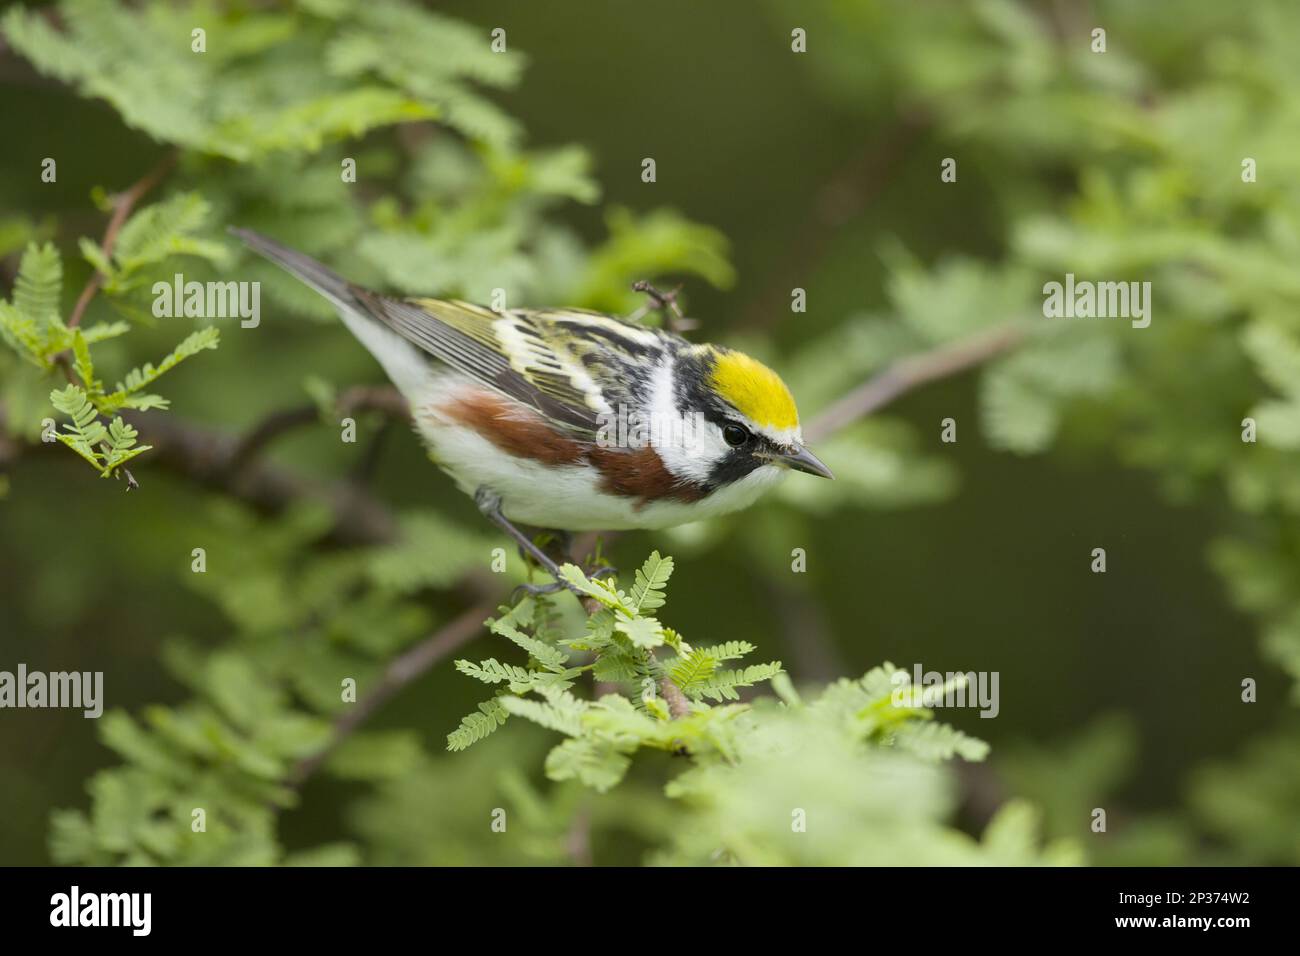 Chestnut-sided Warbler (Dendroica pensylvanica) adult male, perched on twig during migration, Gulf Coast, Texas, U.S.A. Stock Photo